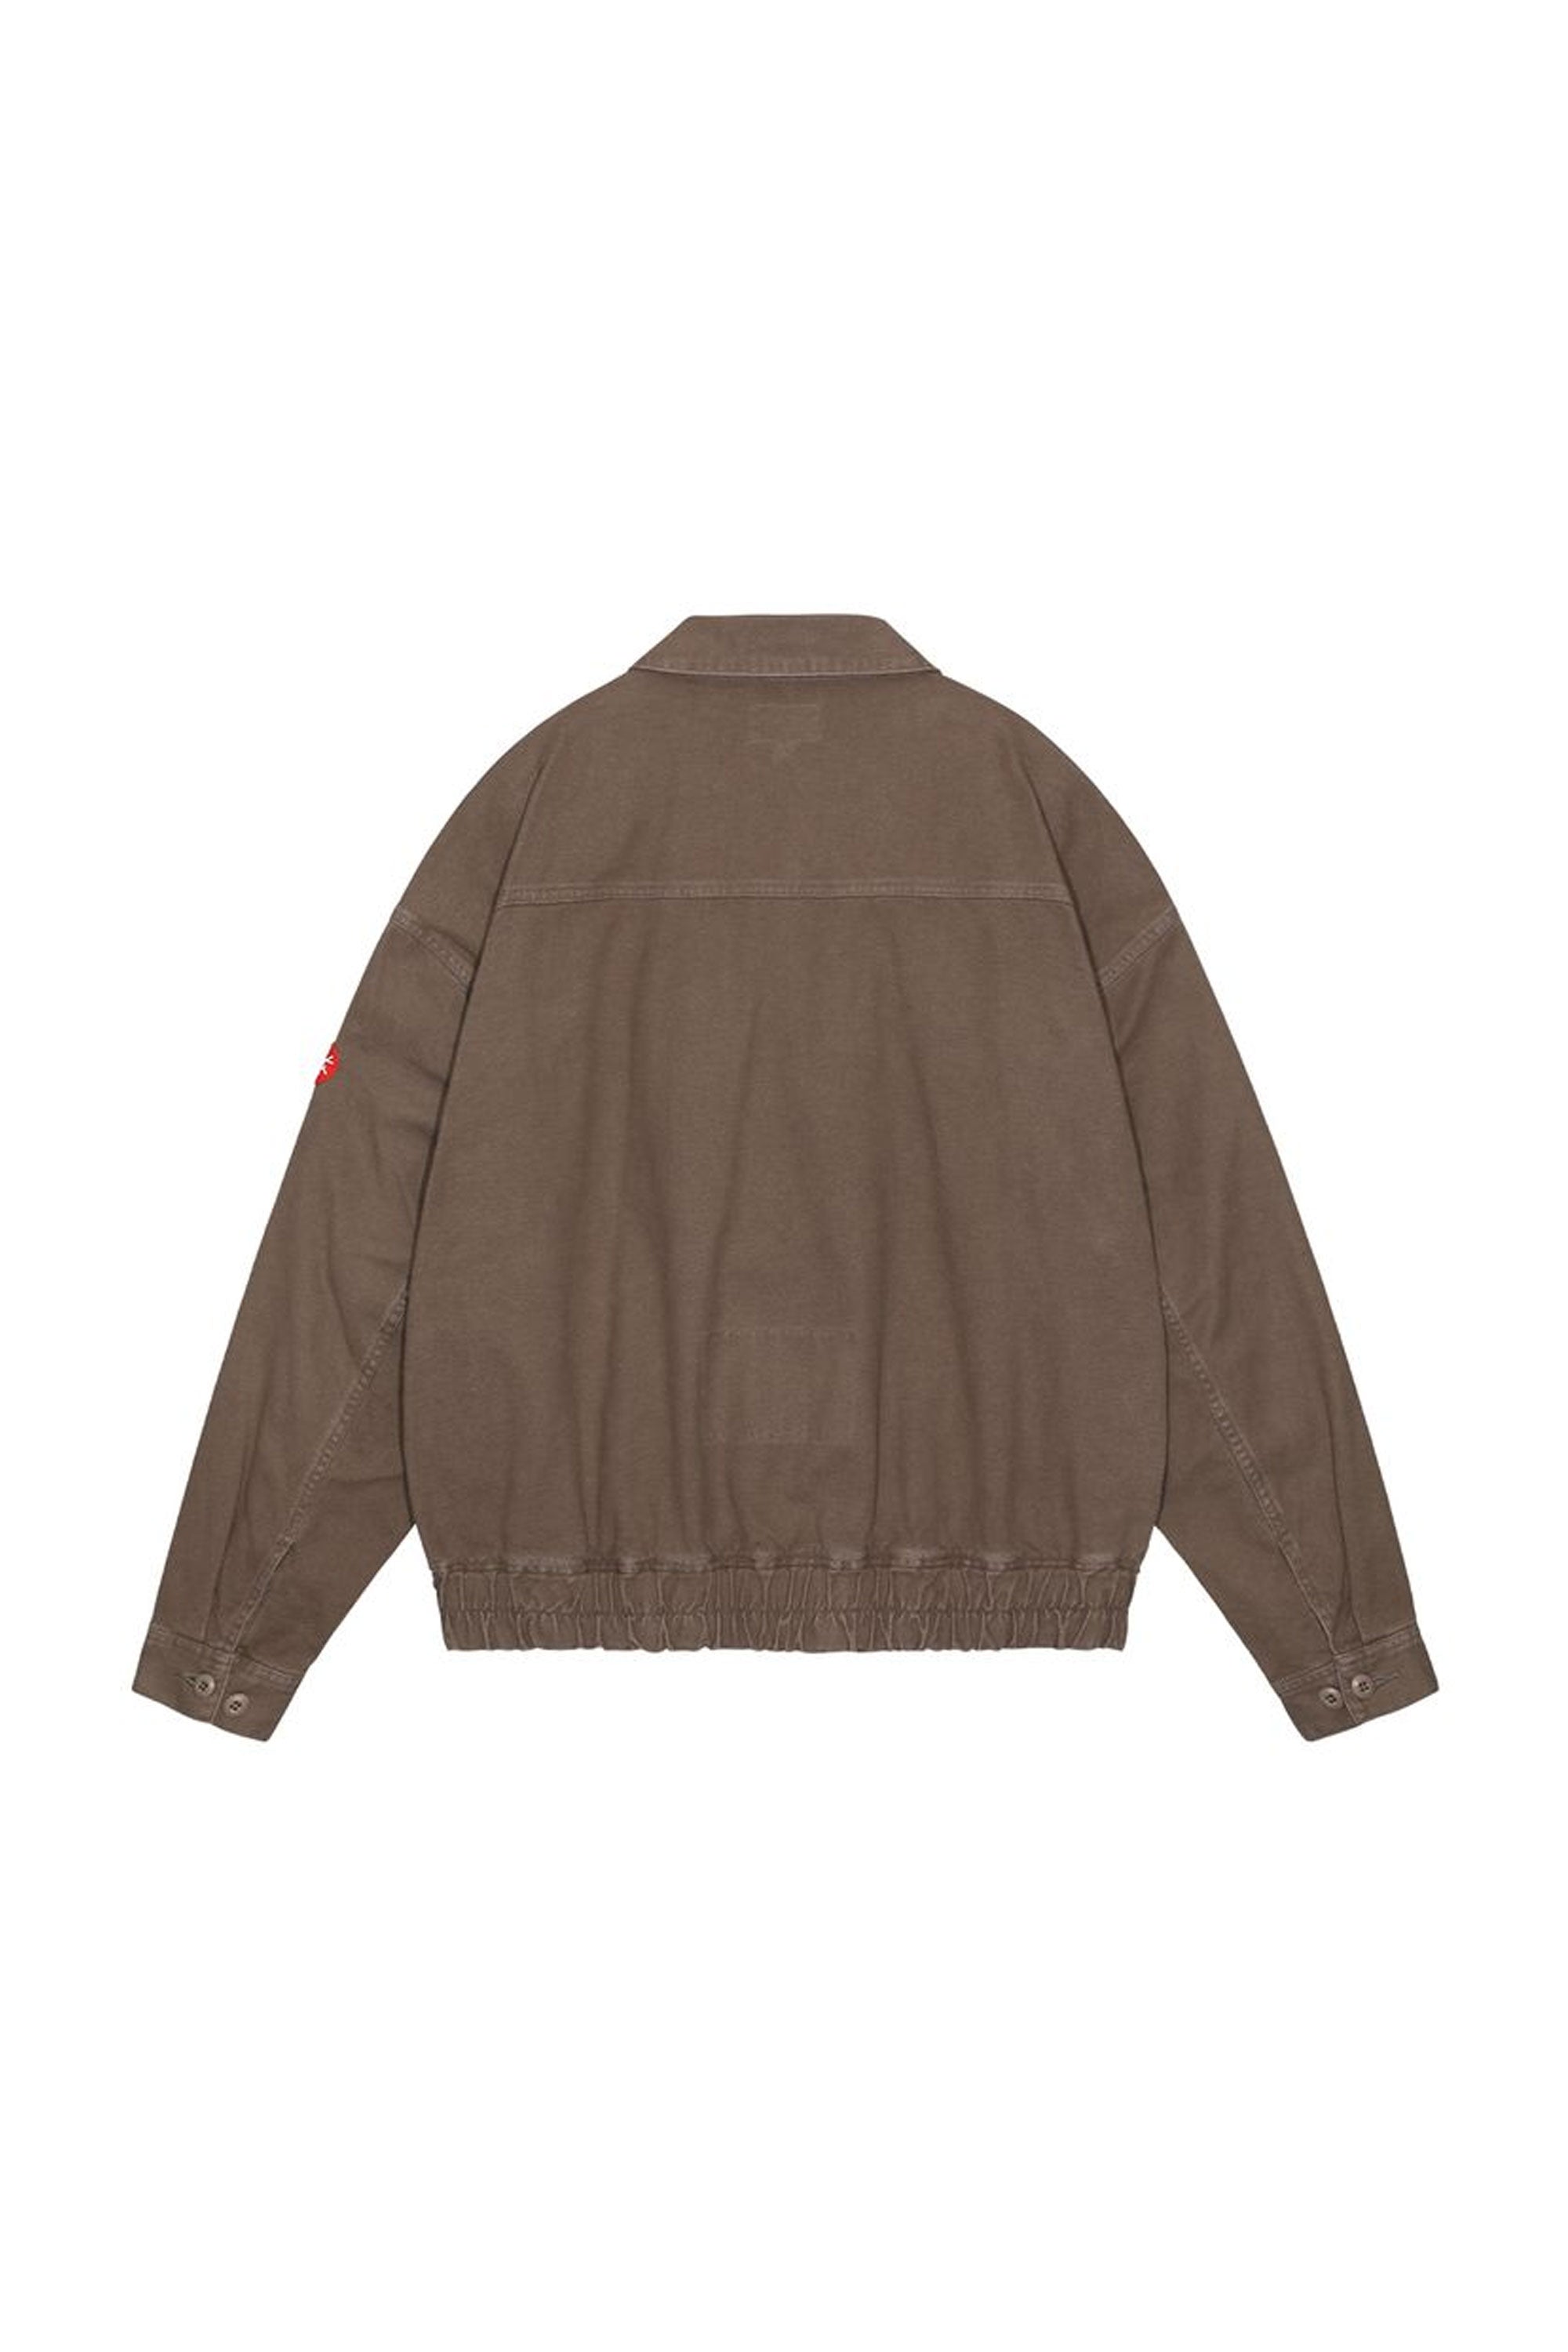 The CAV EMPT - COMMUNITY BUTTON JACKET  available online with global shipping, and in PAM Stores Melbourne and Sydney.